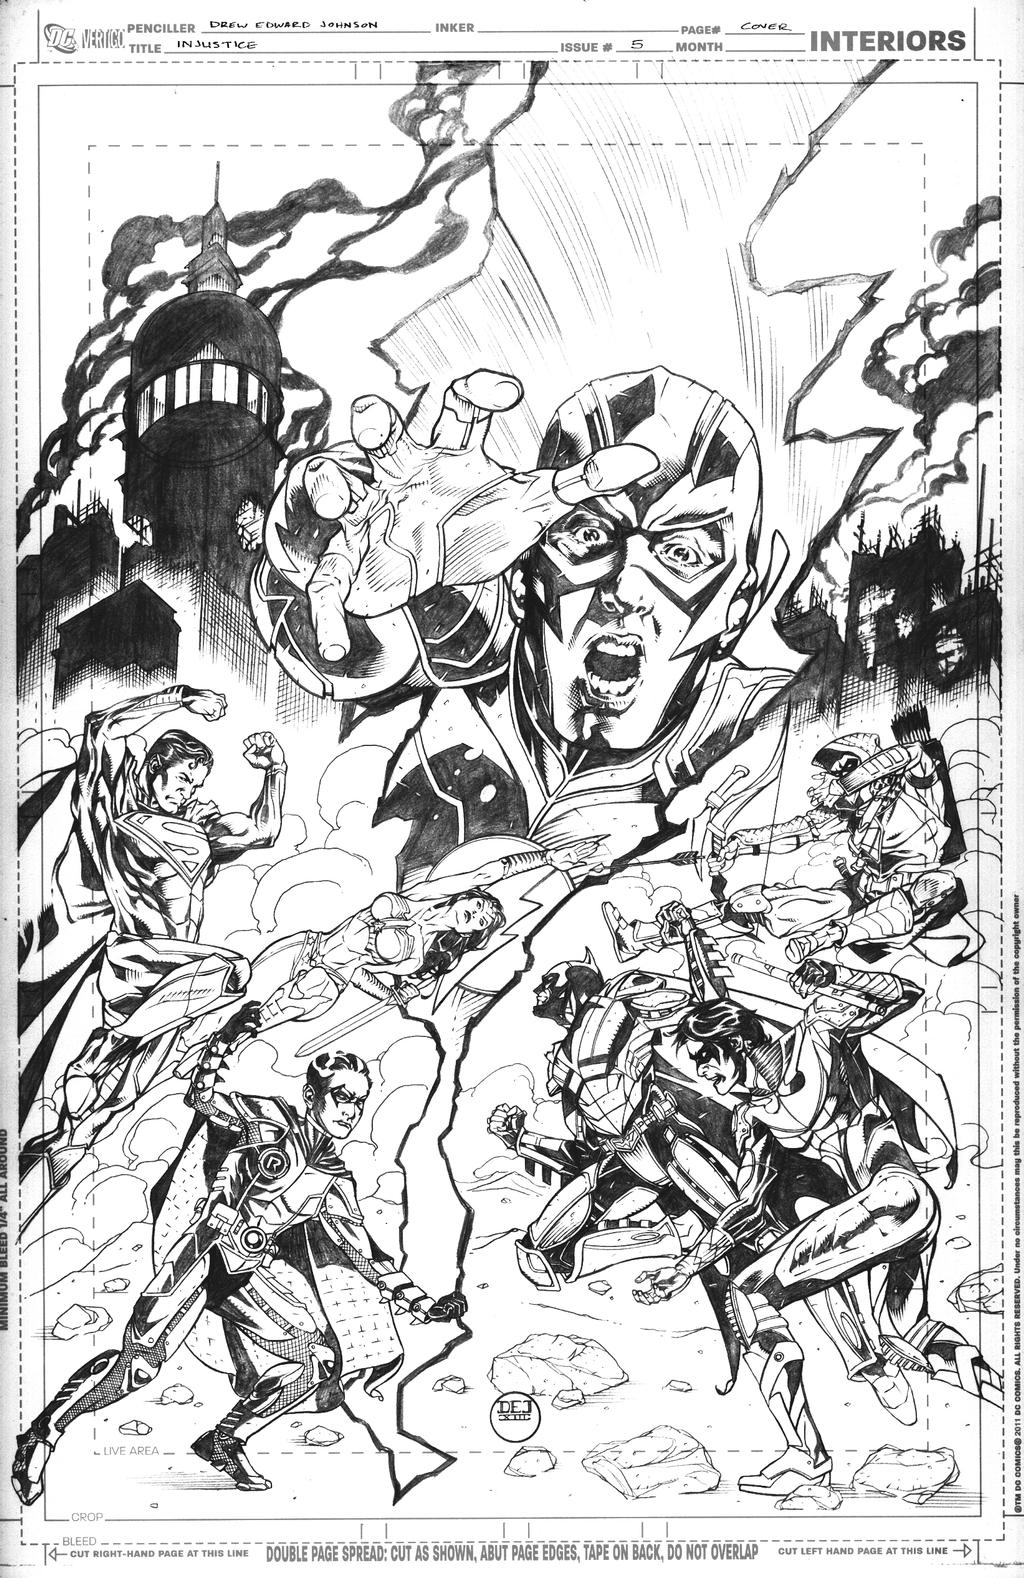 INJUSTICE: GODS AMONG US Issue 5 Cover Pencils